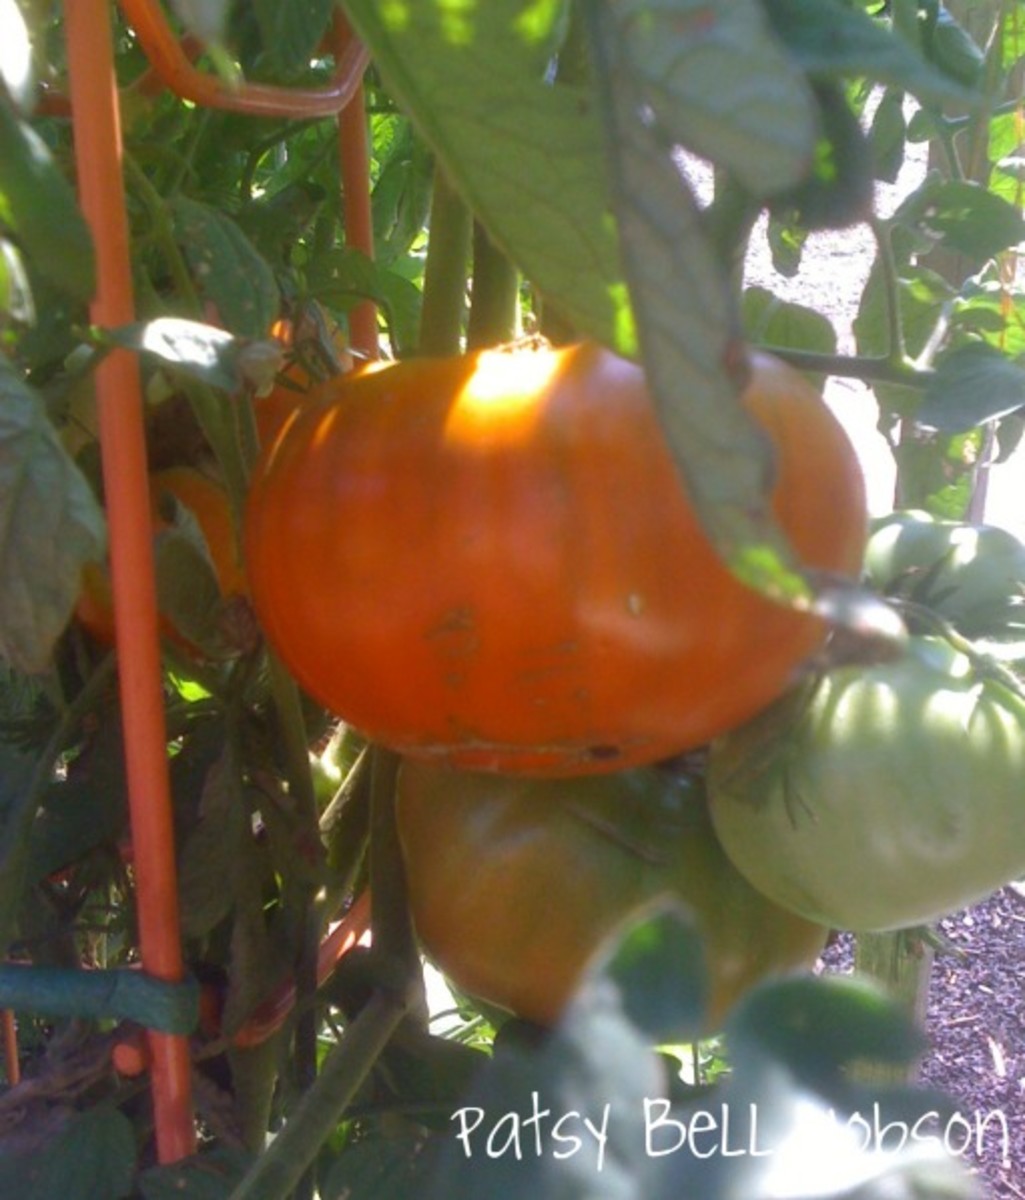 More of a brick than black, the color and taste are deep, rich award winning tomatoes.